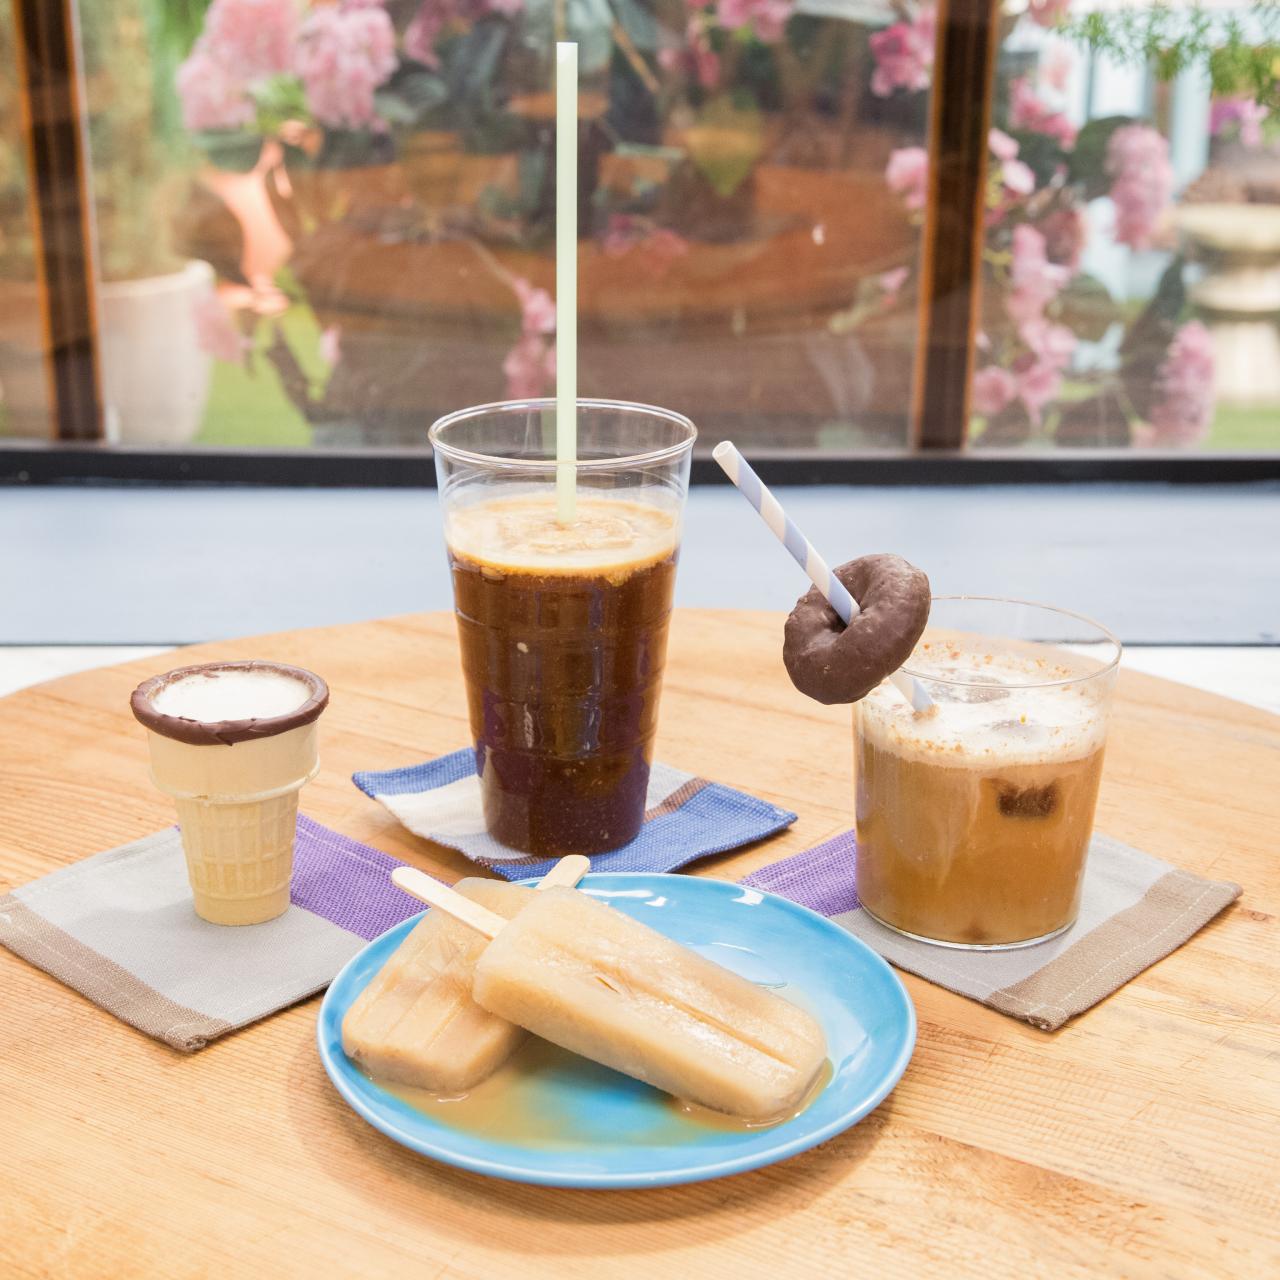 https://food.fnr.sndimg.com/content/dam/images/food/fullset/2016/7/18/0/KC1008H_Cold-Brew-Pops-Upside-Down-Iced-Coffee-Ice-Cream-Iced-Coffee-and-Crushed-Iced-Coffee-in-a-Cone_s4x3.jpg.rend.hgtvcom.1280.1280.suffix/1468908487388.jpeg